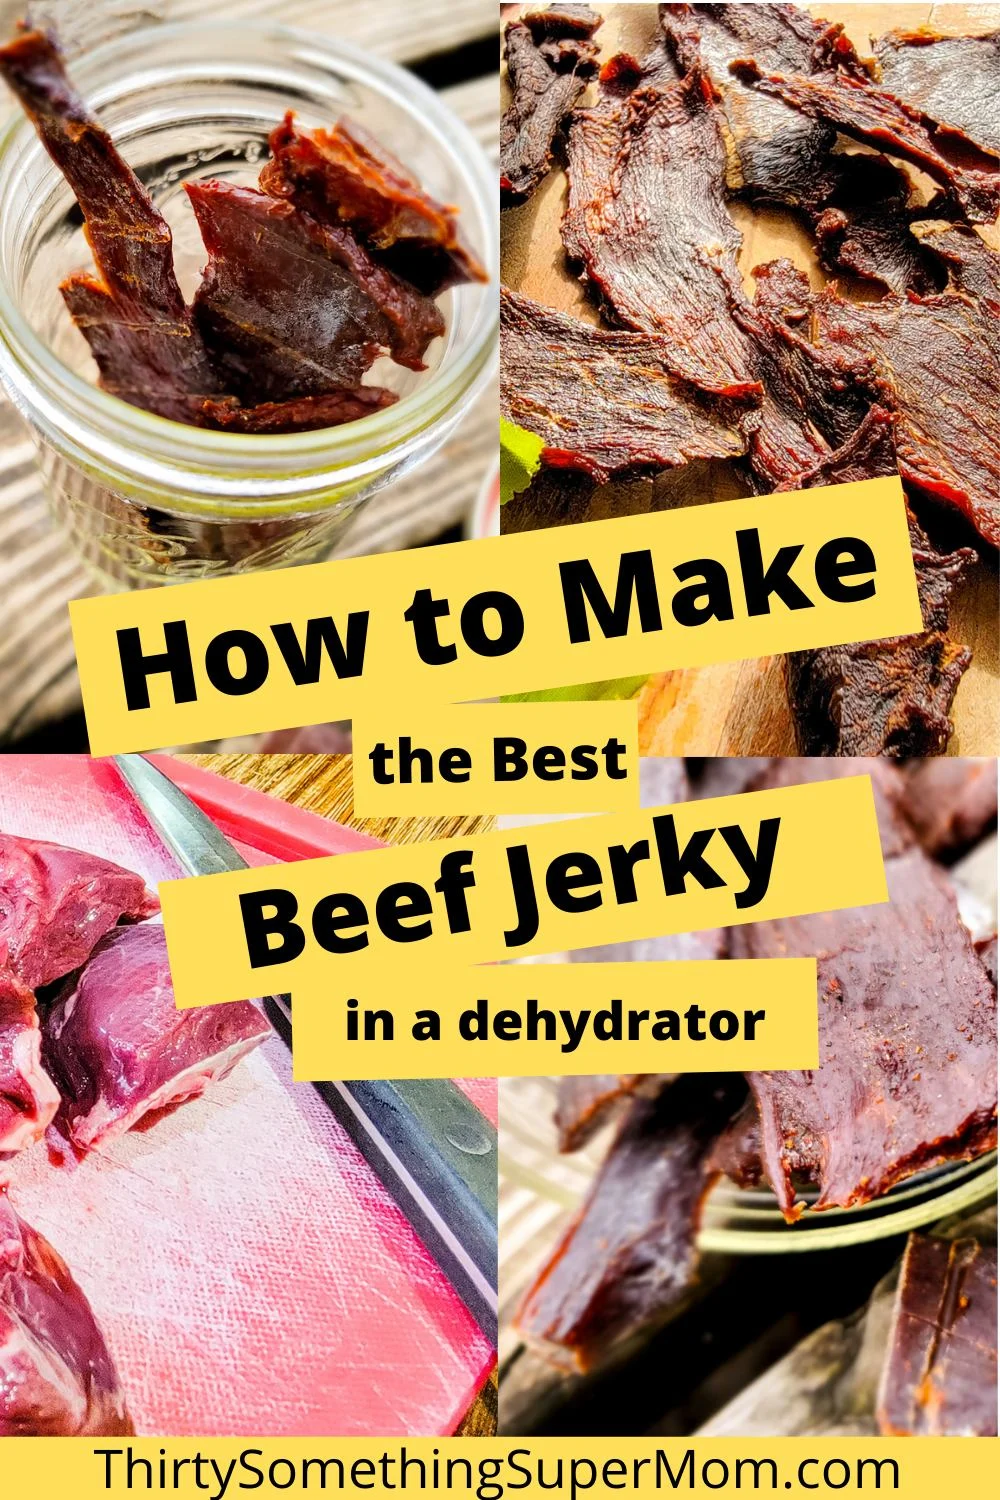 https://thirtysomethingsupermom.com/wp-content/uploads/2022/04/How-to-Make-beef-jerky-in-a-dehydrator-.png.webp